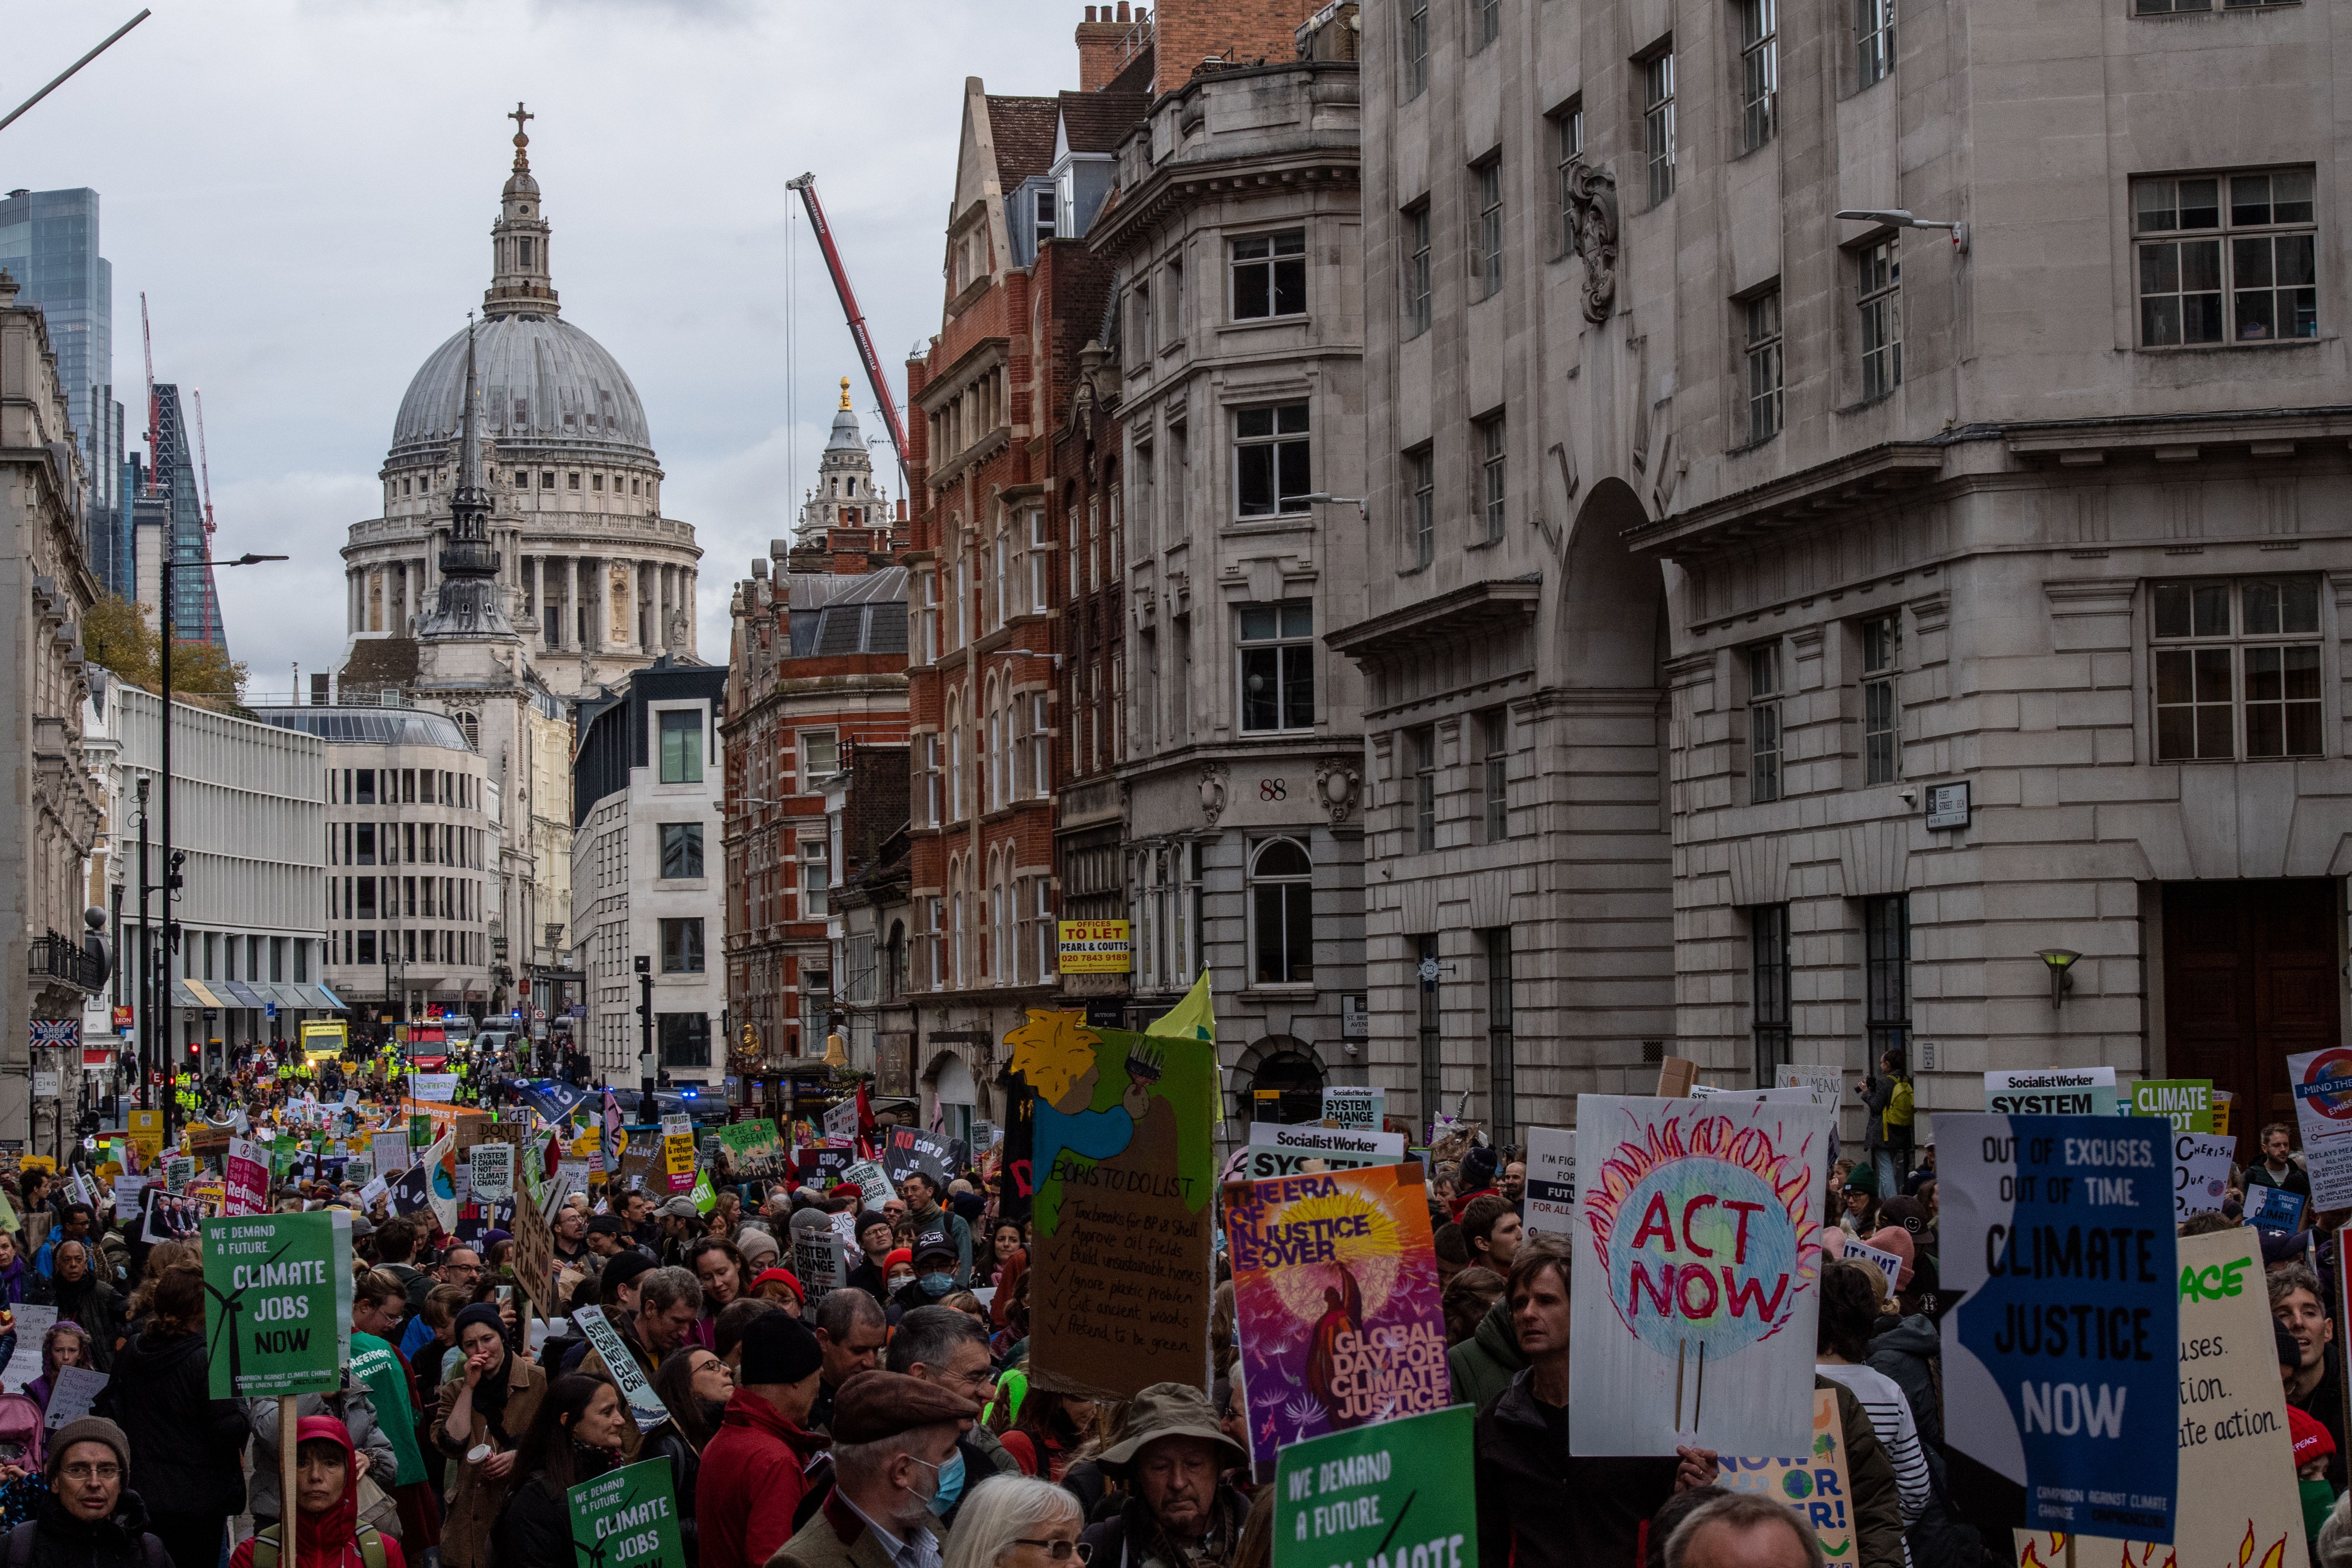 Protesters march along Fleet Street during a global day of action on climate change on November 6, 2021 in London, United Kingdom.